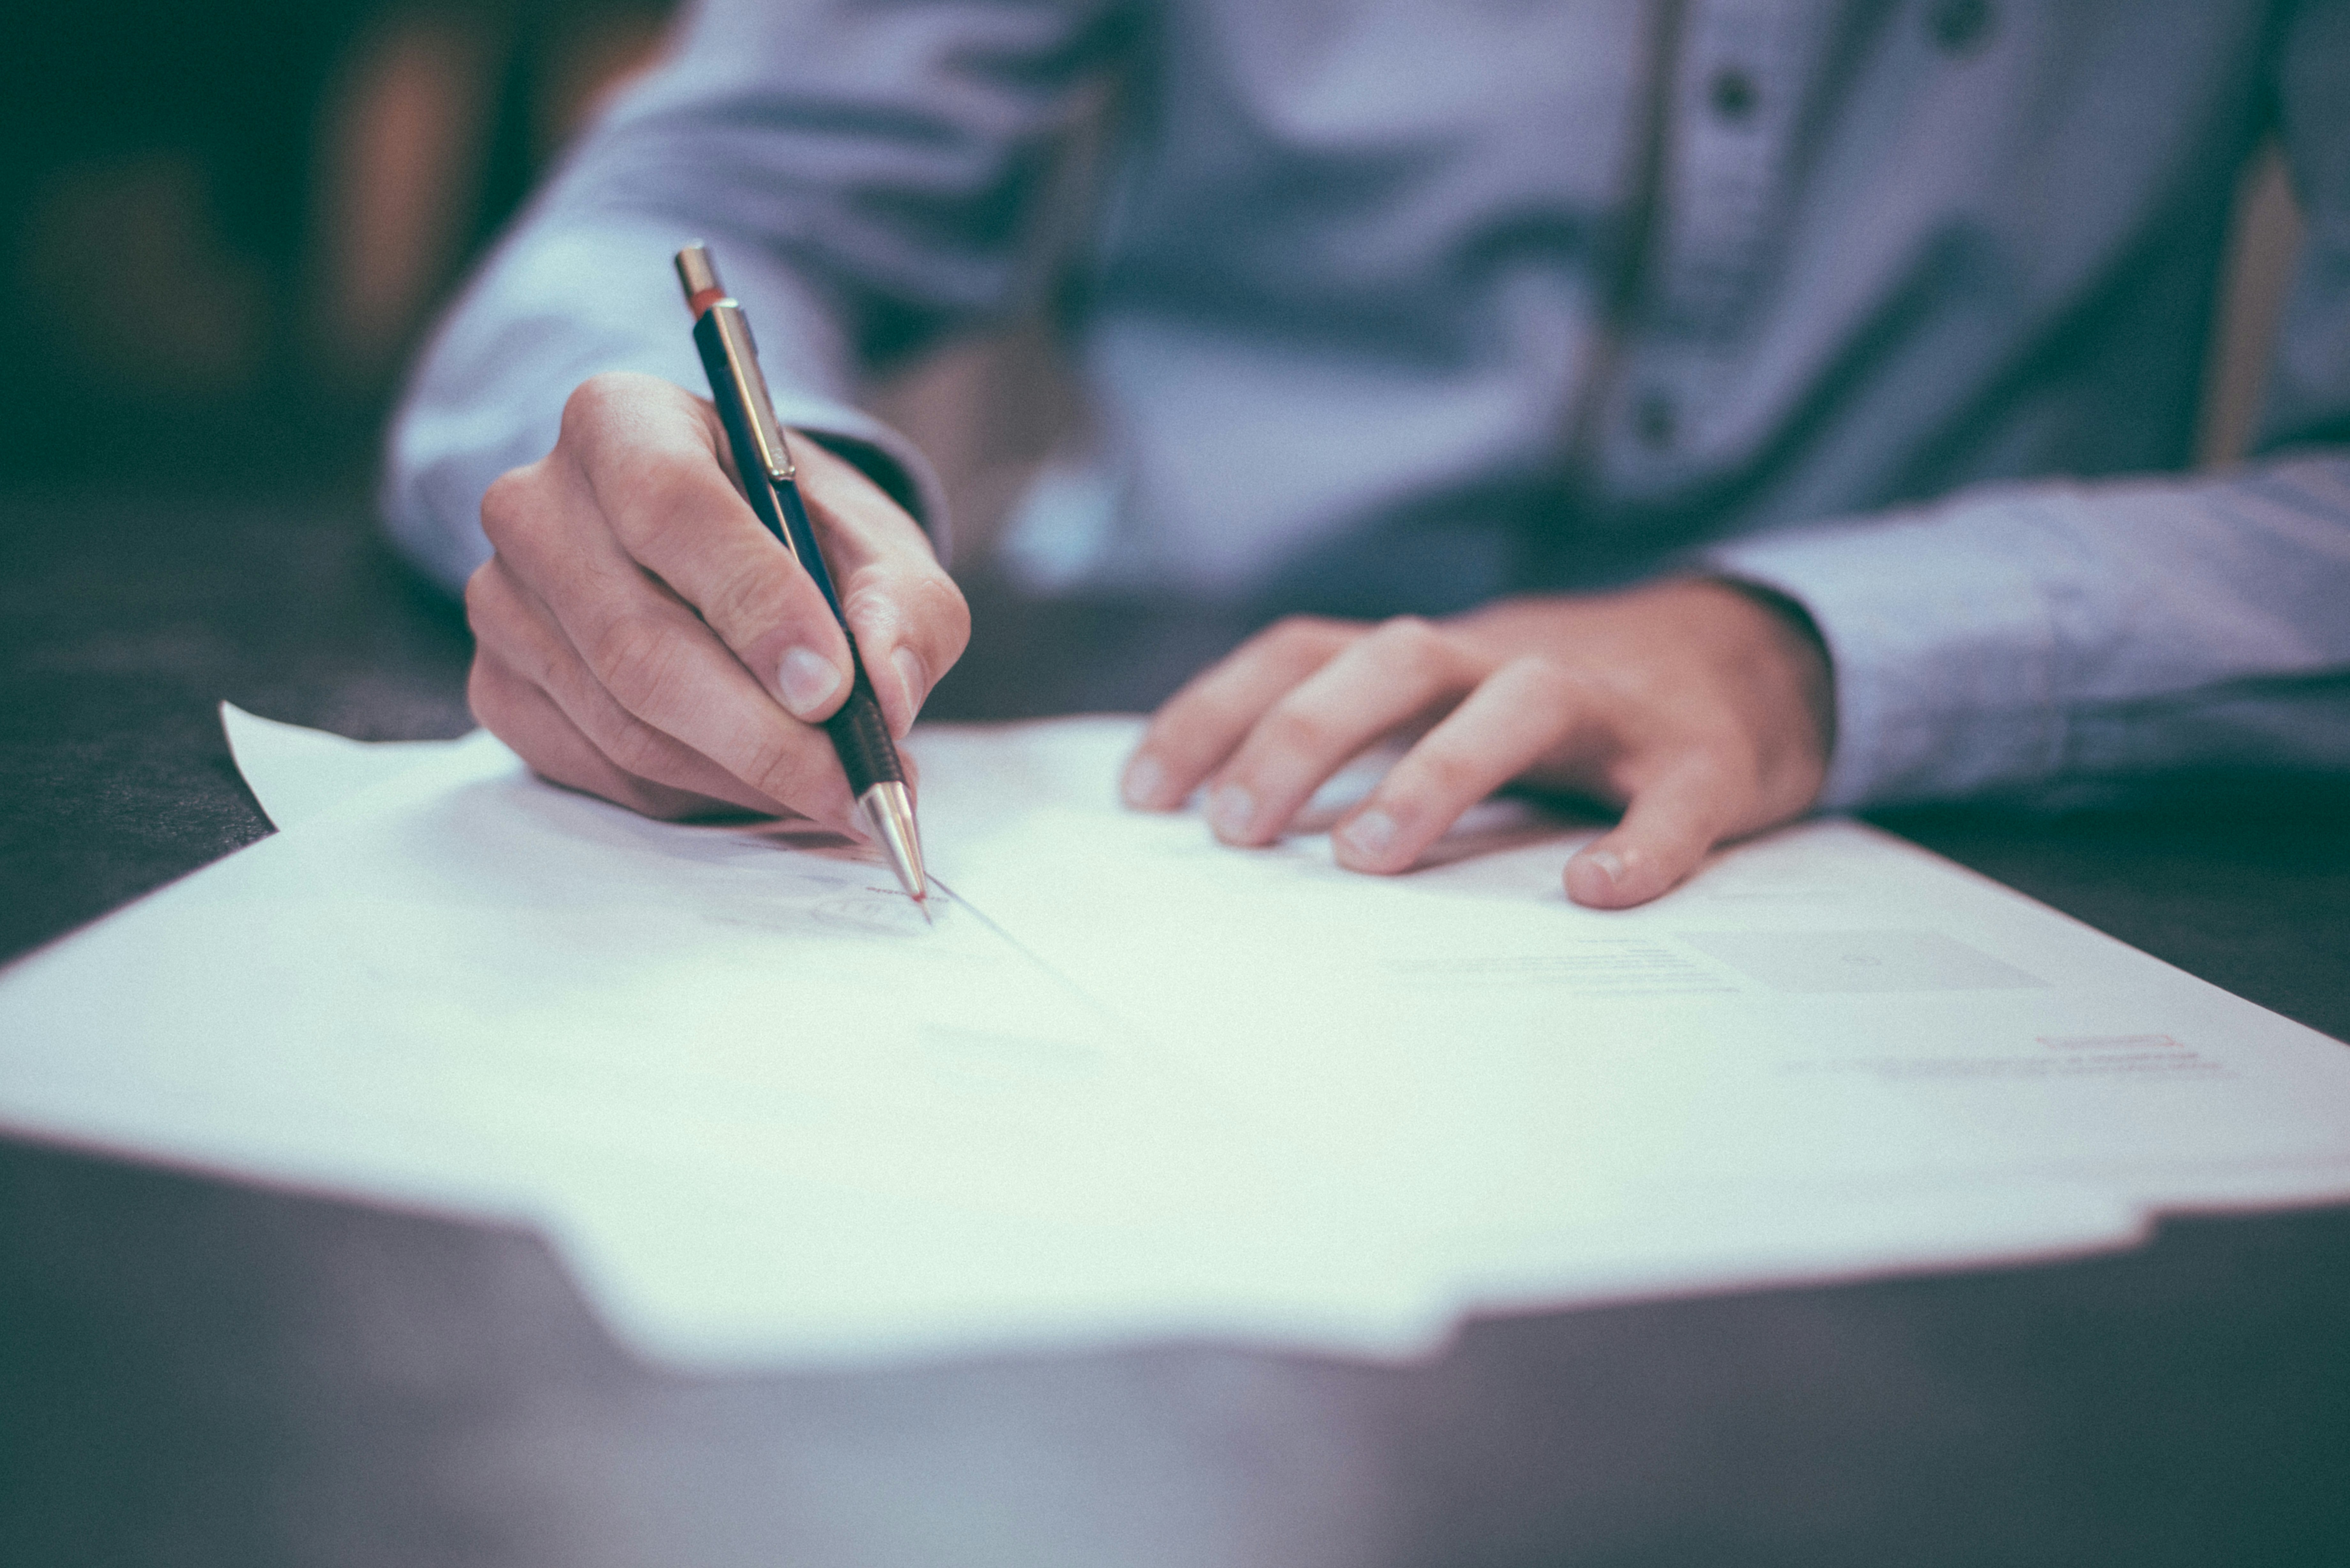 A man signing papers | Source: Unsplash